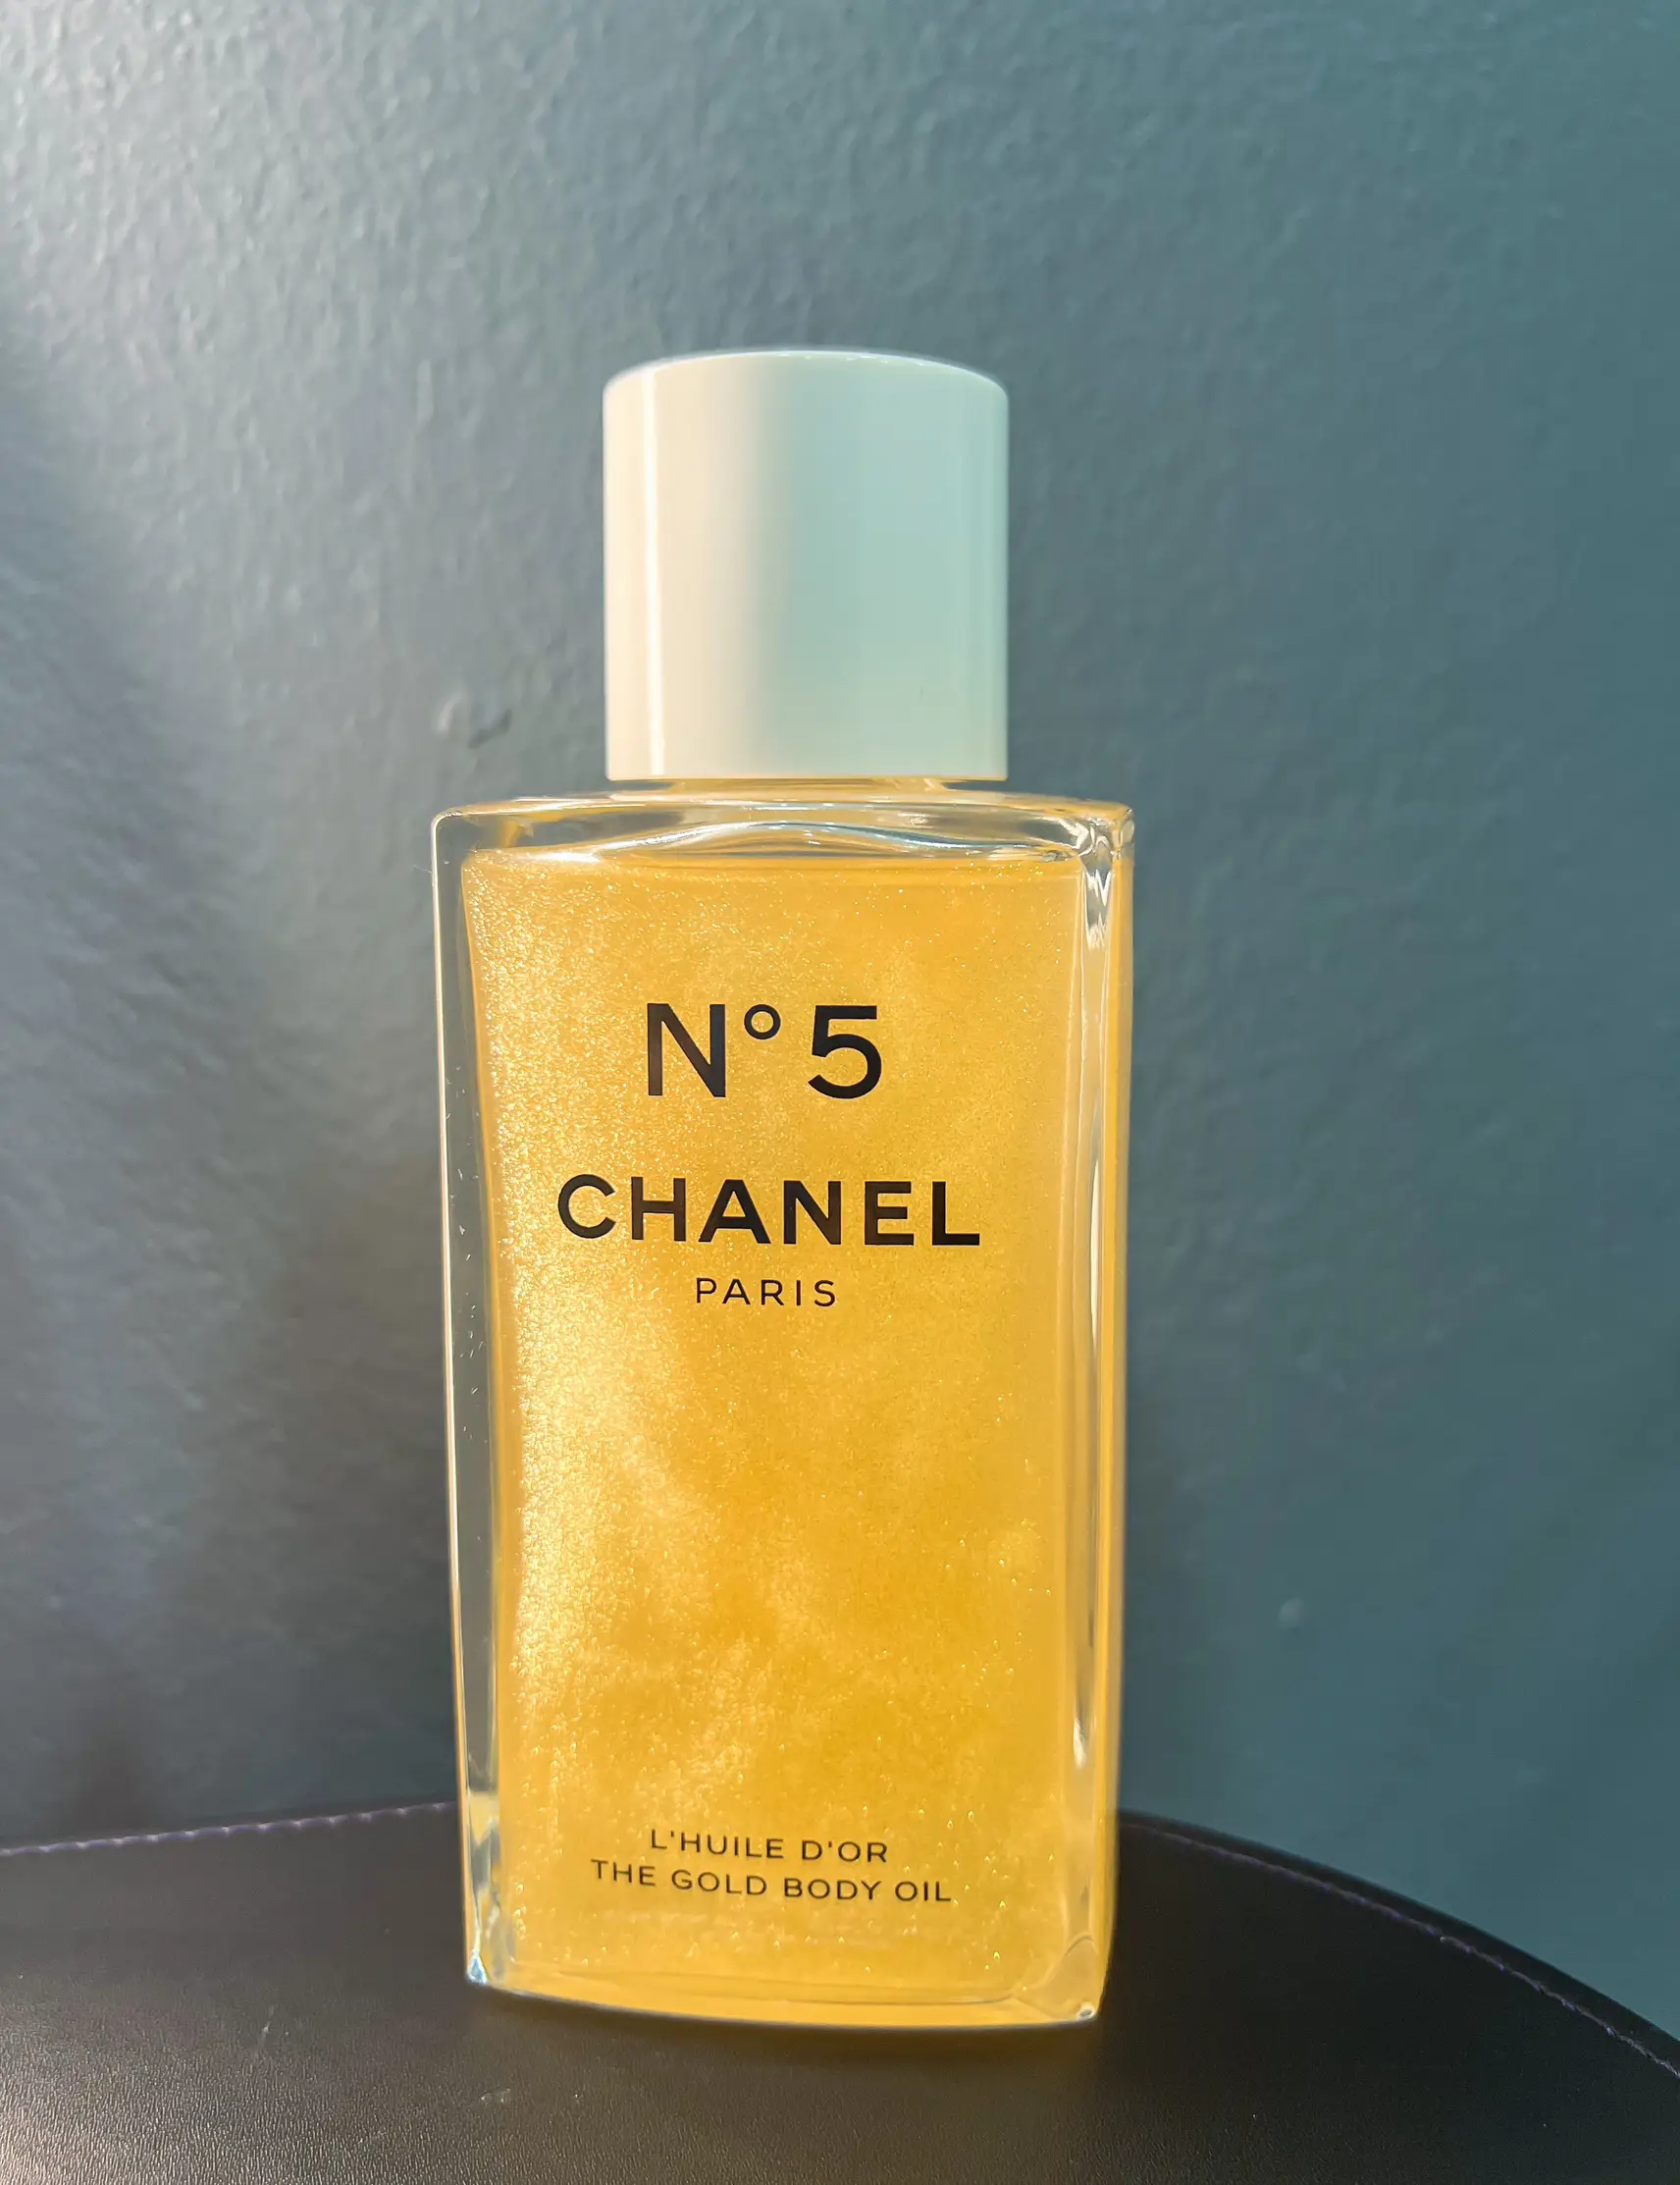 Chanel No 5 the body oil 6.8 used Batch code 2018